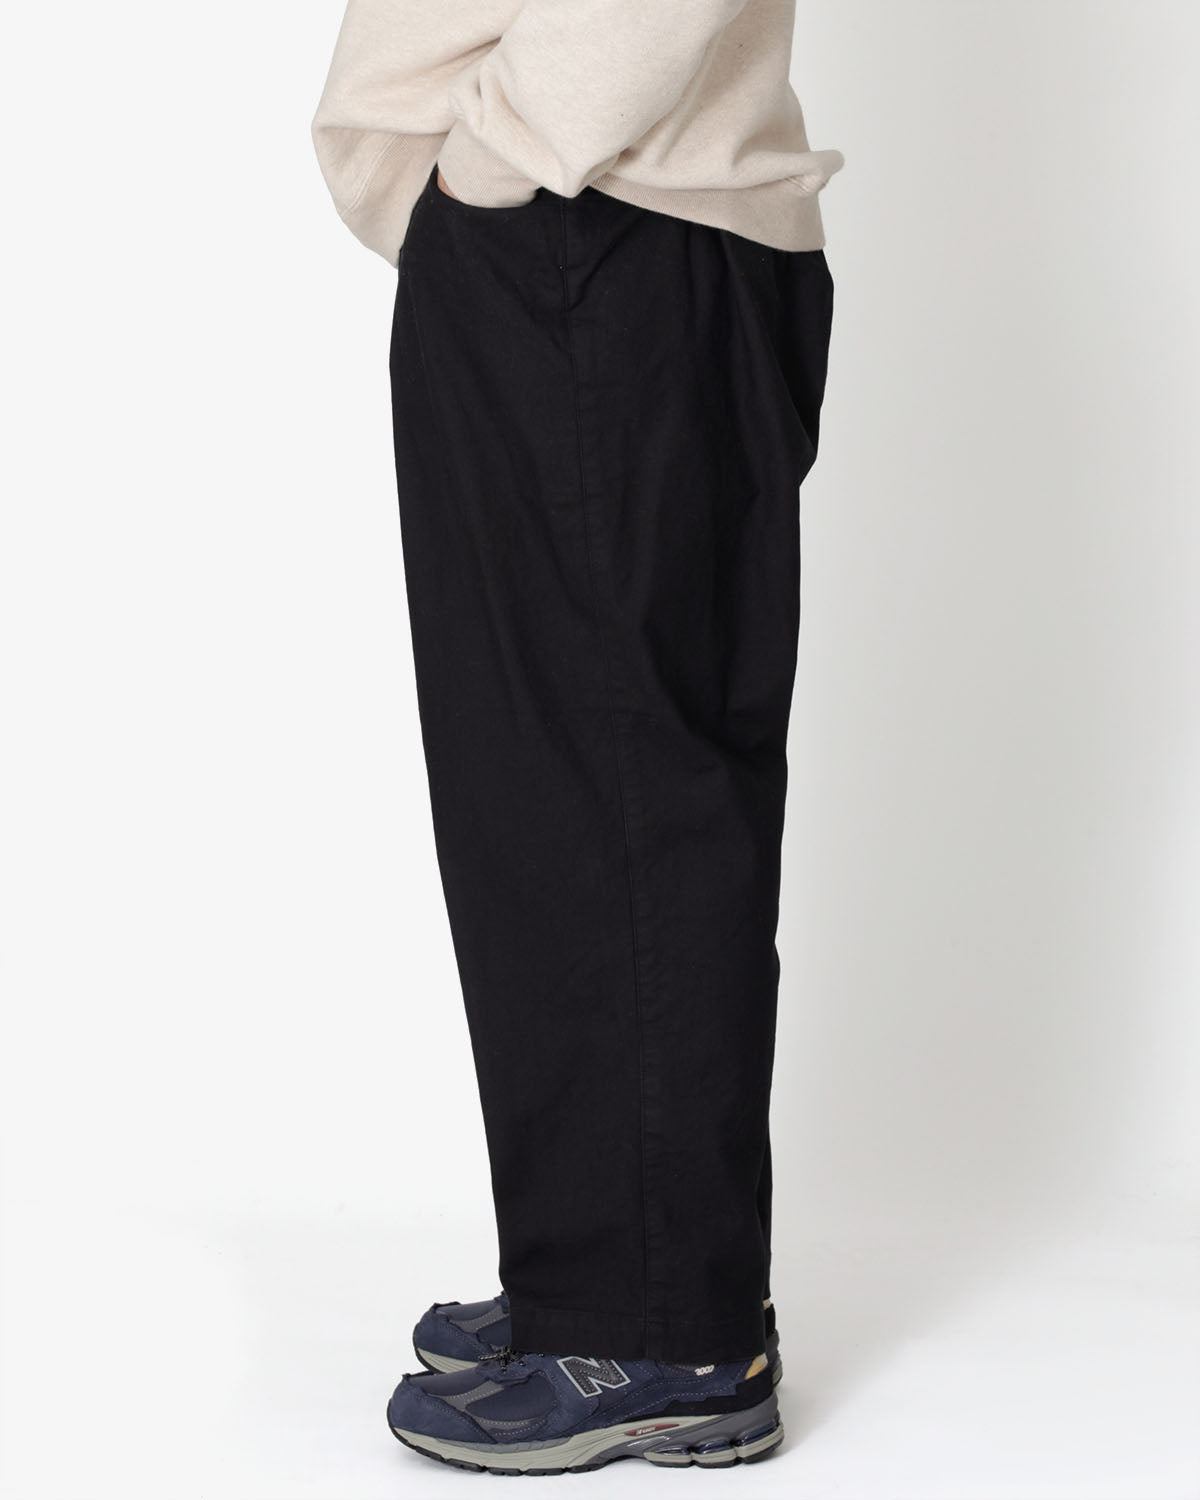 SUPER WIDE CHINO PANTS